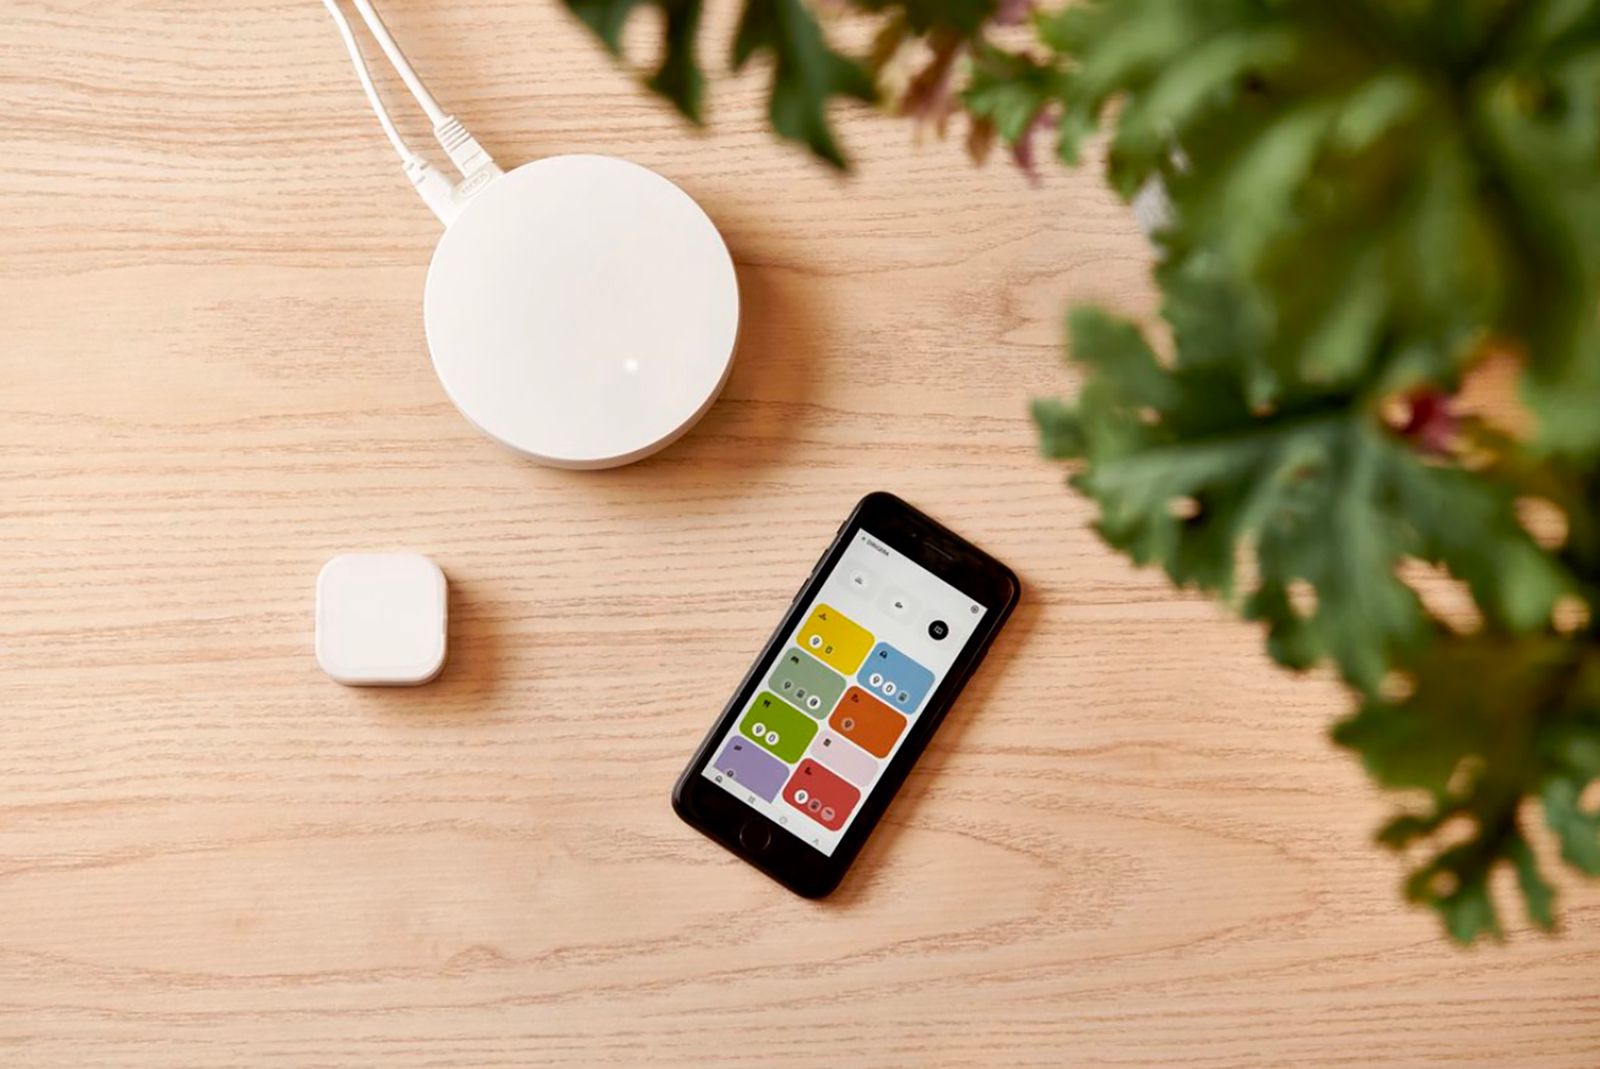 New Ikea smart home hub comes with a revamped 'Home' app